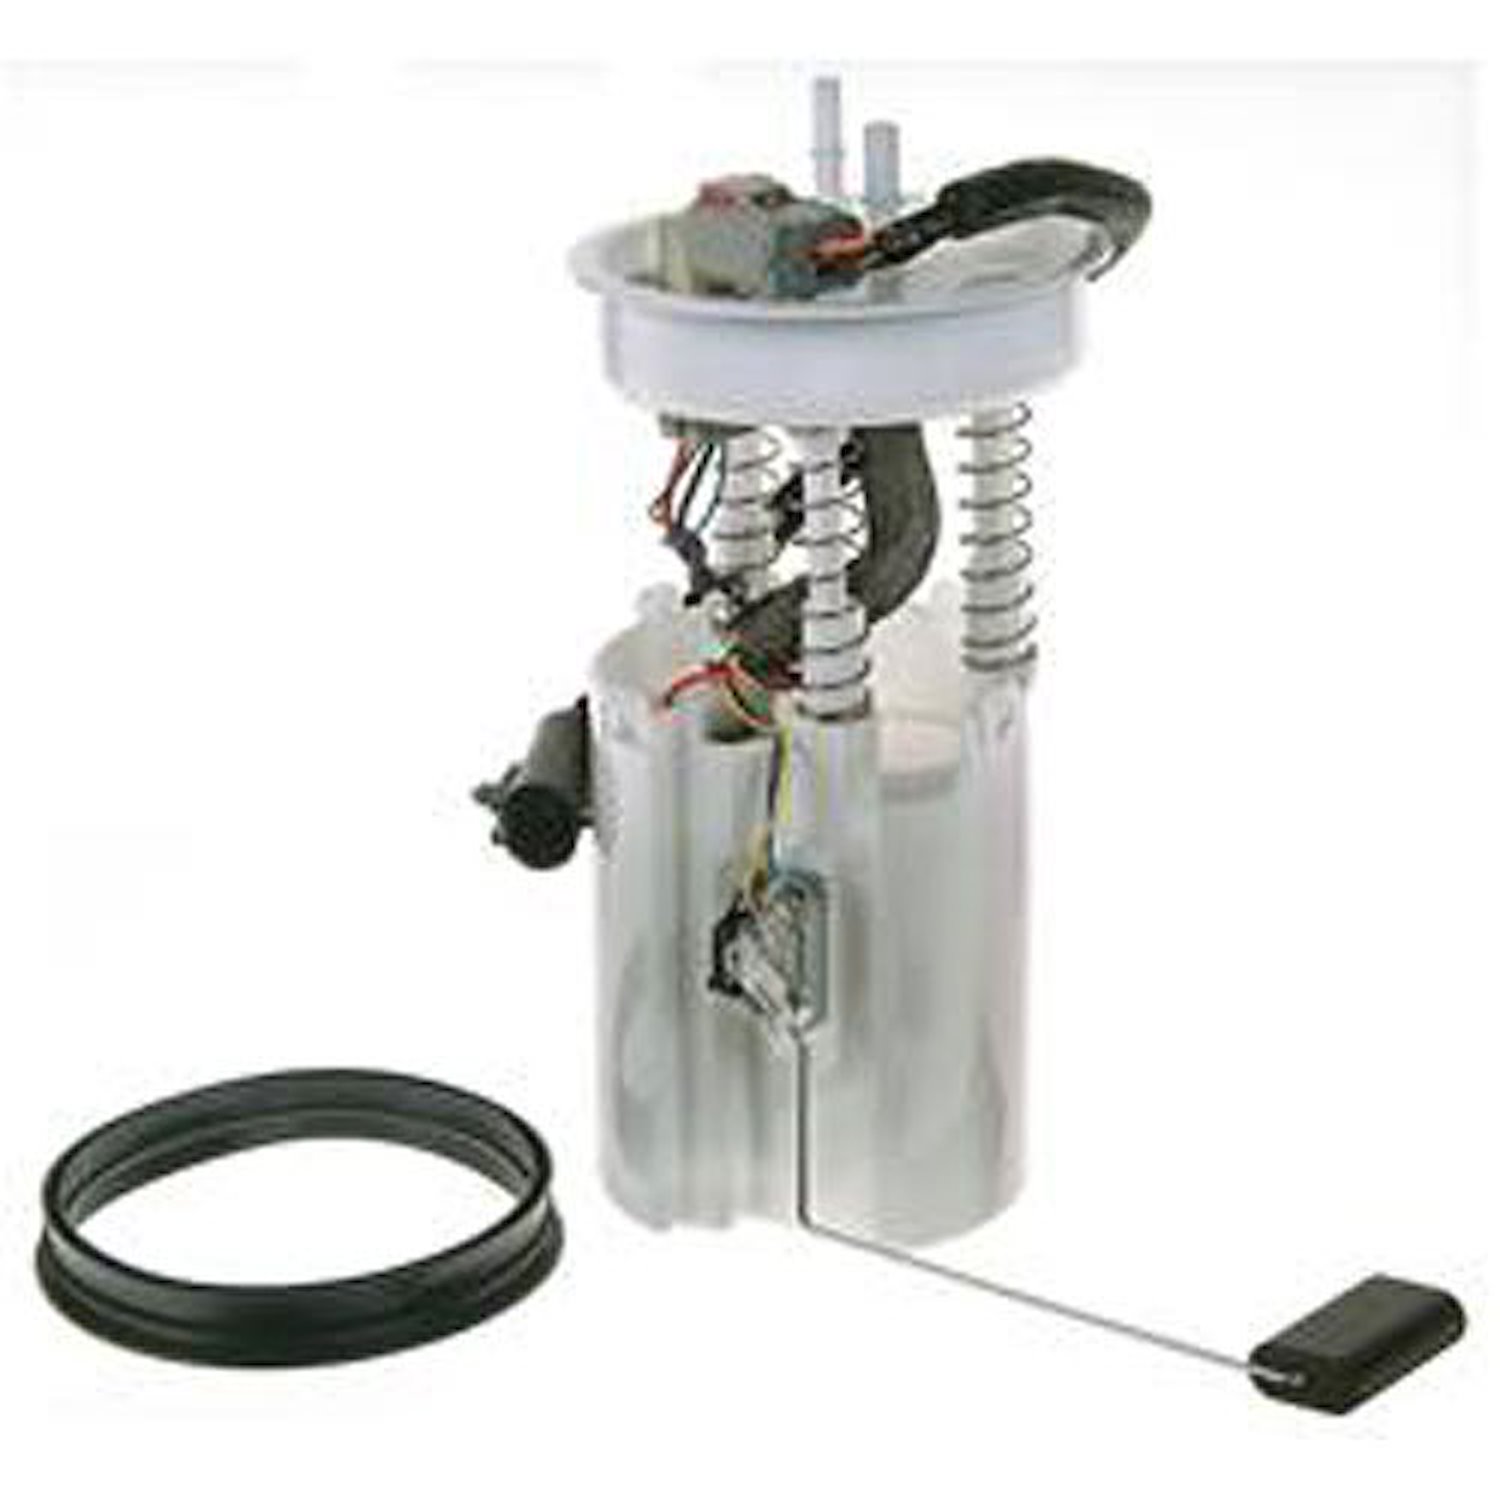 OE Chrysler/Dodge/Jeep Replacement Electric Fuel Pump Module Assembly 1993-94 Jeep Grand Cherokee 4.0L L6/5.2L V8